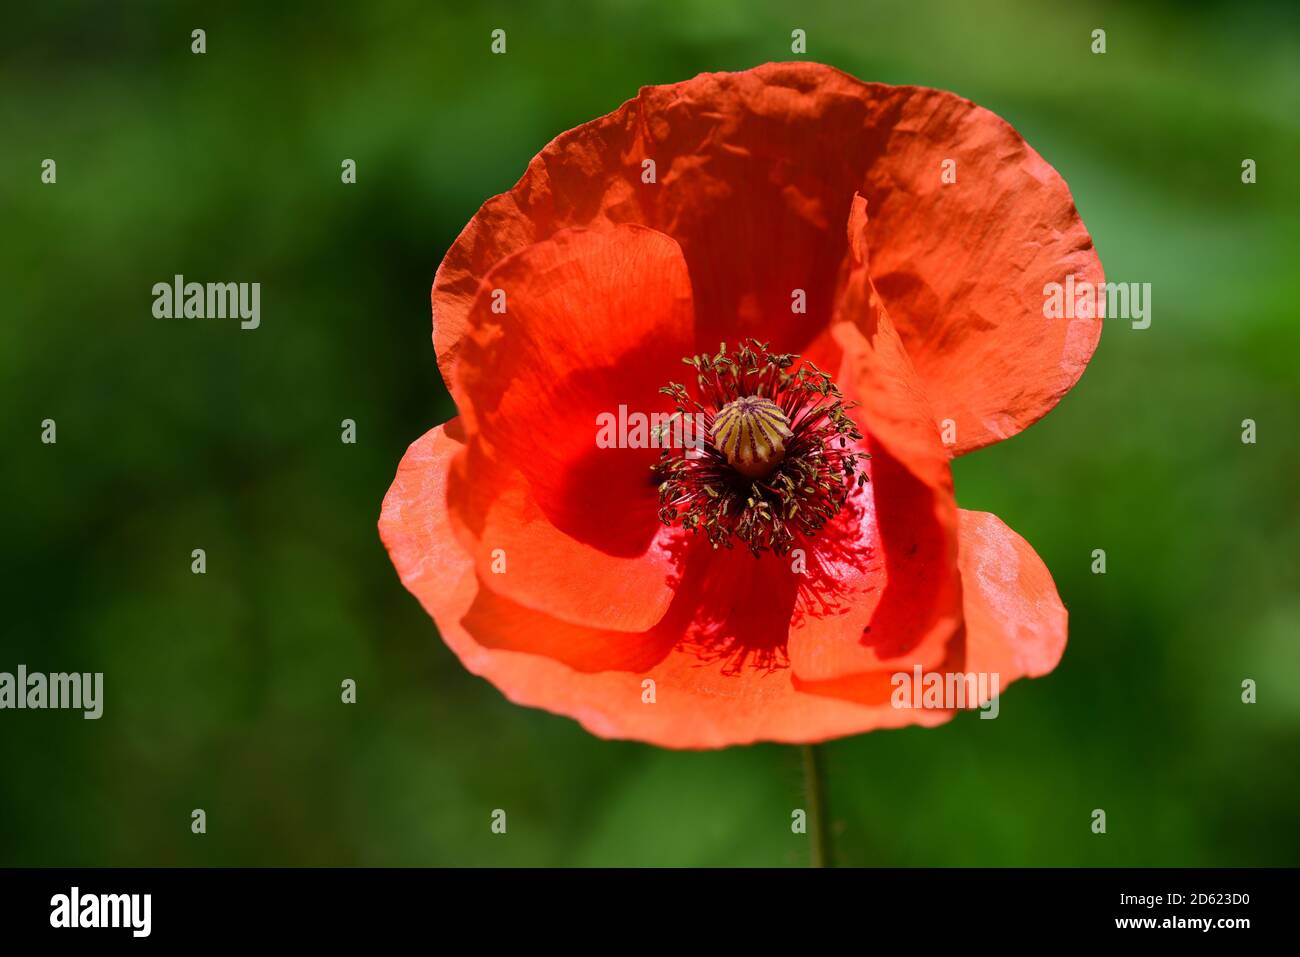 Red flower of one poppy. Papaver rhoeas. Red petals on a green background. Close-up view of a flower plant. Stock Photo